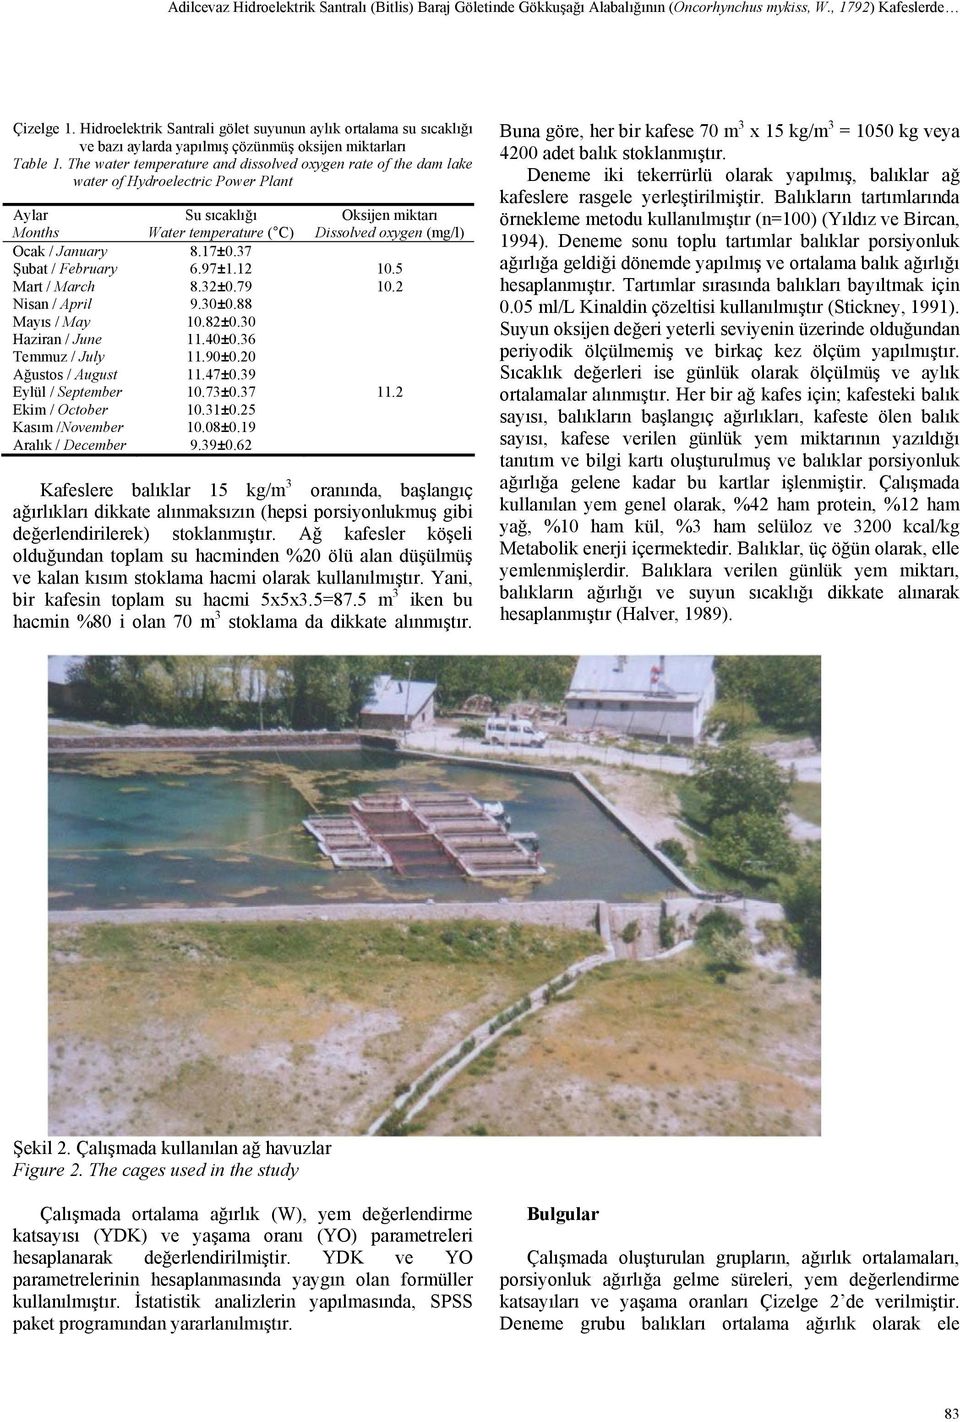 The water temperature and dissolved oxygen rate of the dam lake water of Hydroelectric Power Plant Aylar Months Su sıcaklığı Water temperature ( C) Oksijen miktarı Dissolved oxygen (mg/l) Ocak /